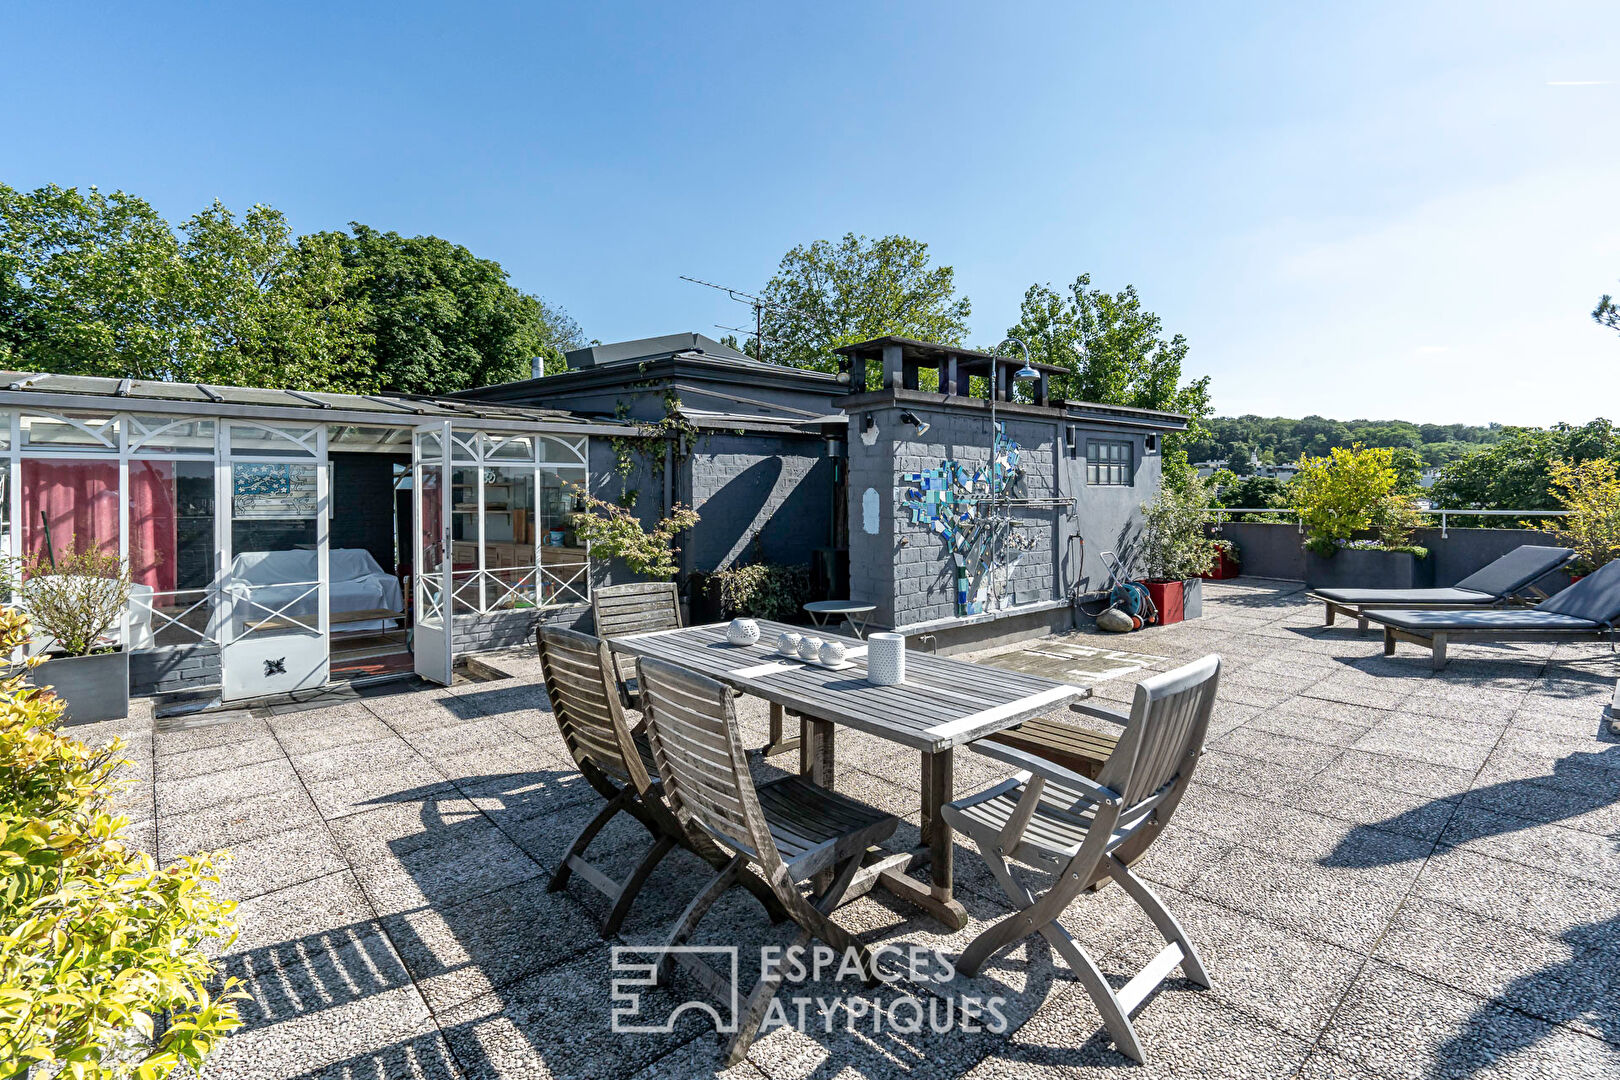 Top floor with roof terrace and breathtaking view in Sèvres Rive-Gauche